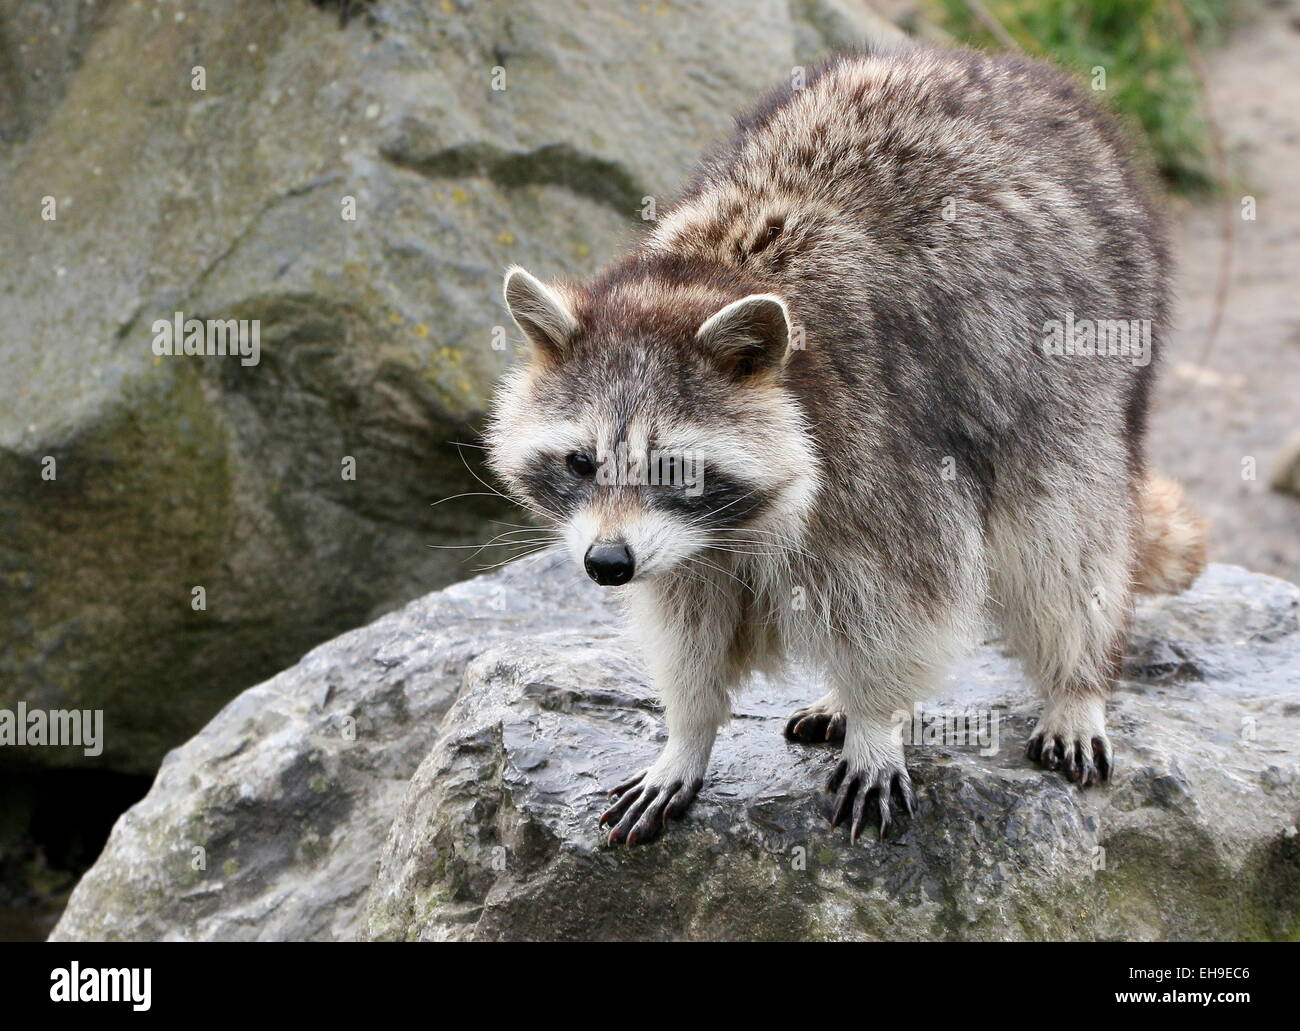 North American or  northern raccoon ( Procyon lotor) posing on a rock Stock Photo